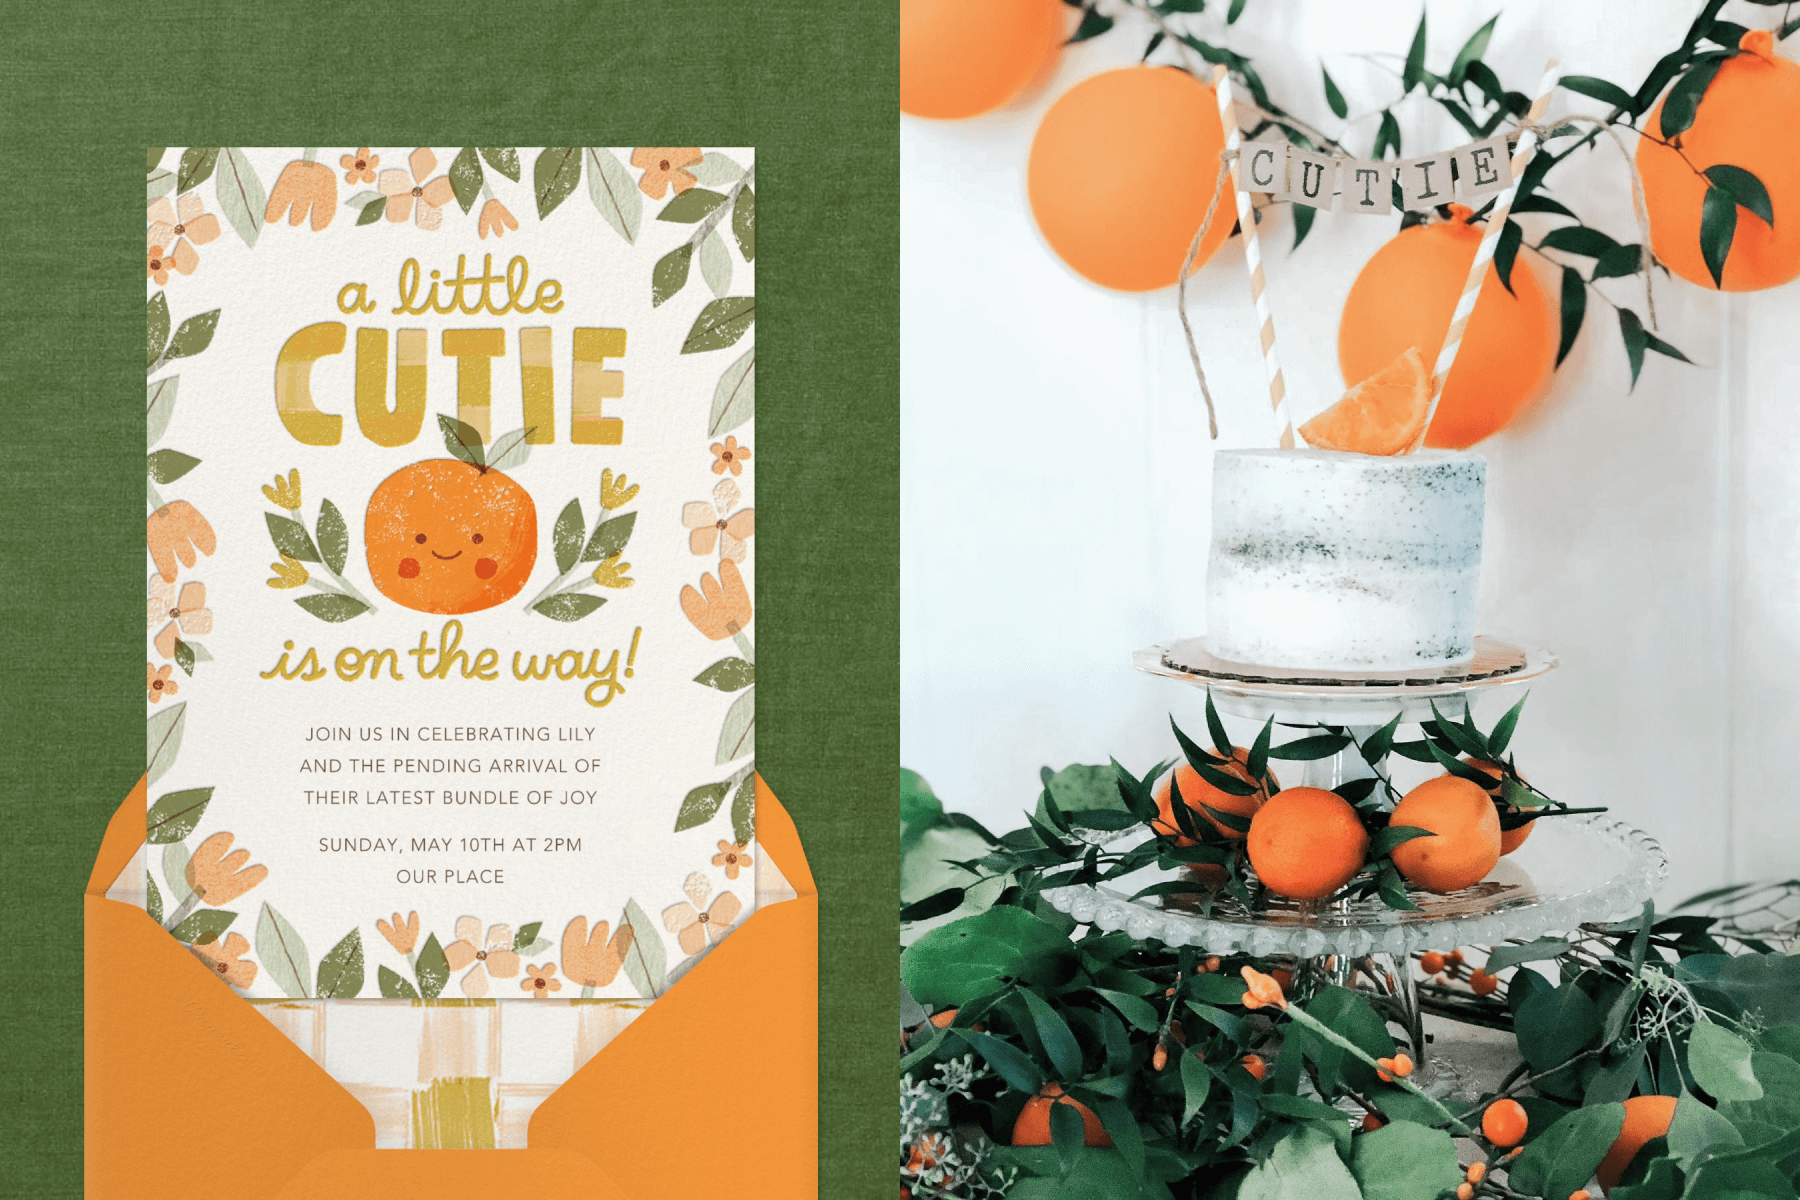 Left: A baby shower invitation that says “A little cutie is on the way” with a smiling clementine and border of orange flowers and green leaves, emerging from an orange envelope. Right: A small white cake with a topper that reads “CUTIE” surrounded by oranges and orange balloons. 